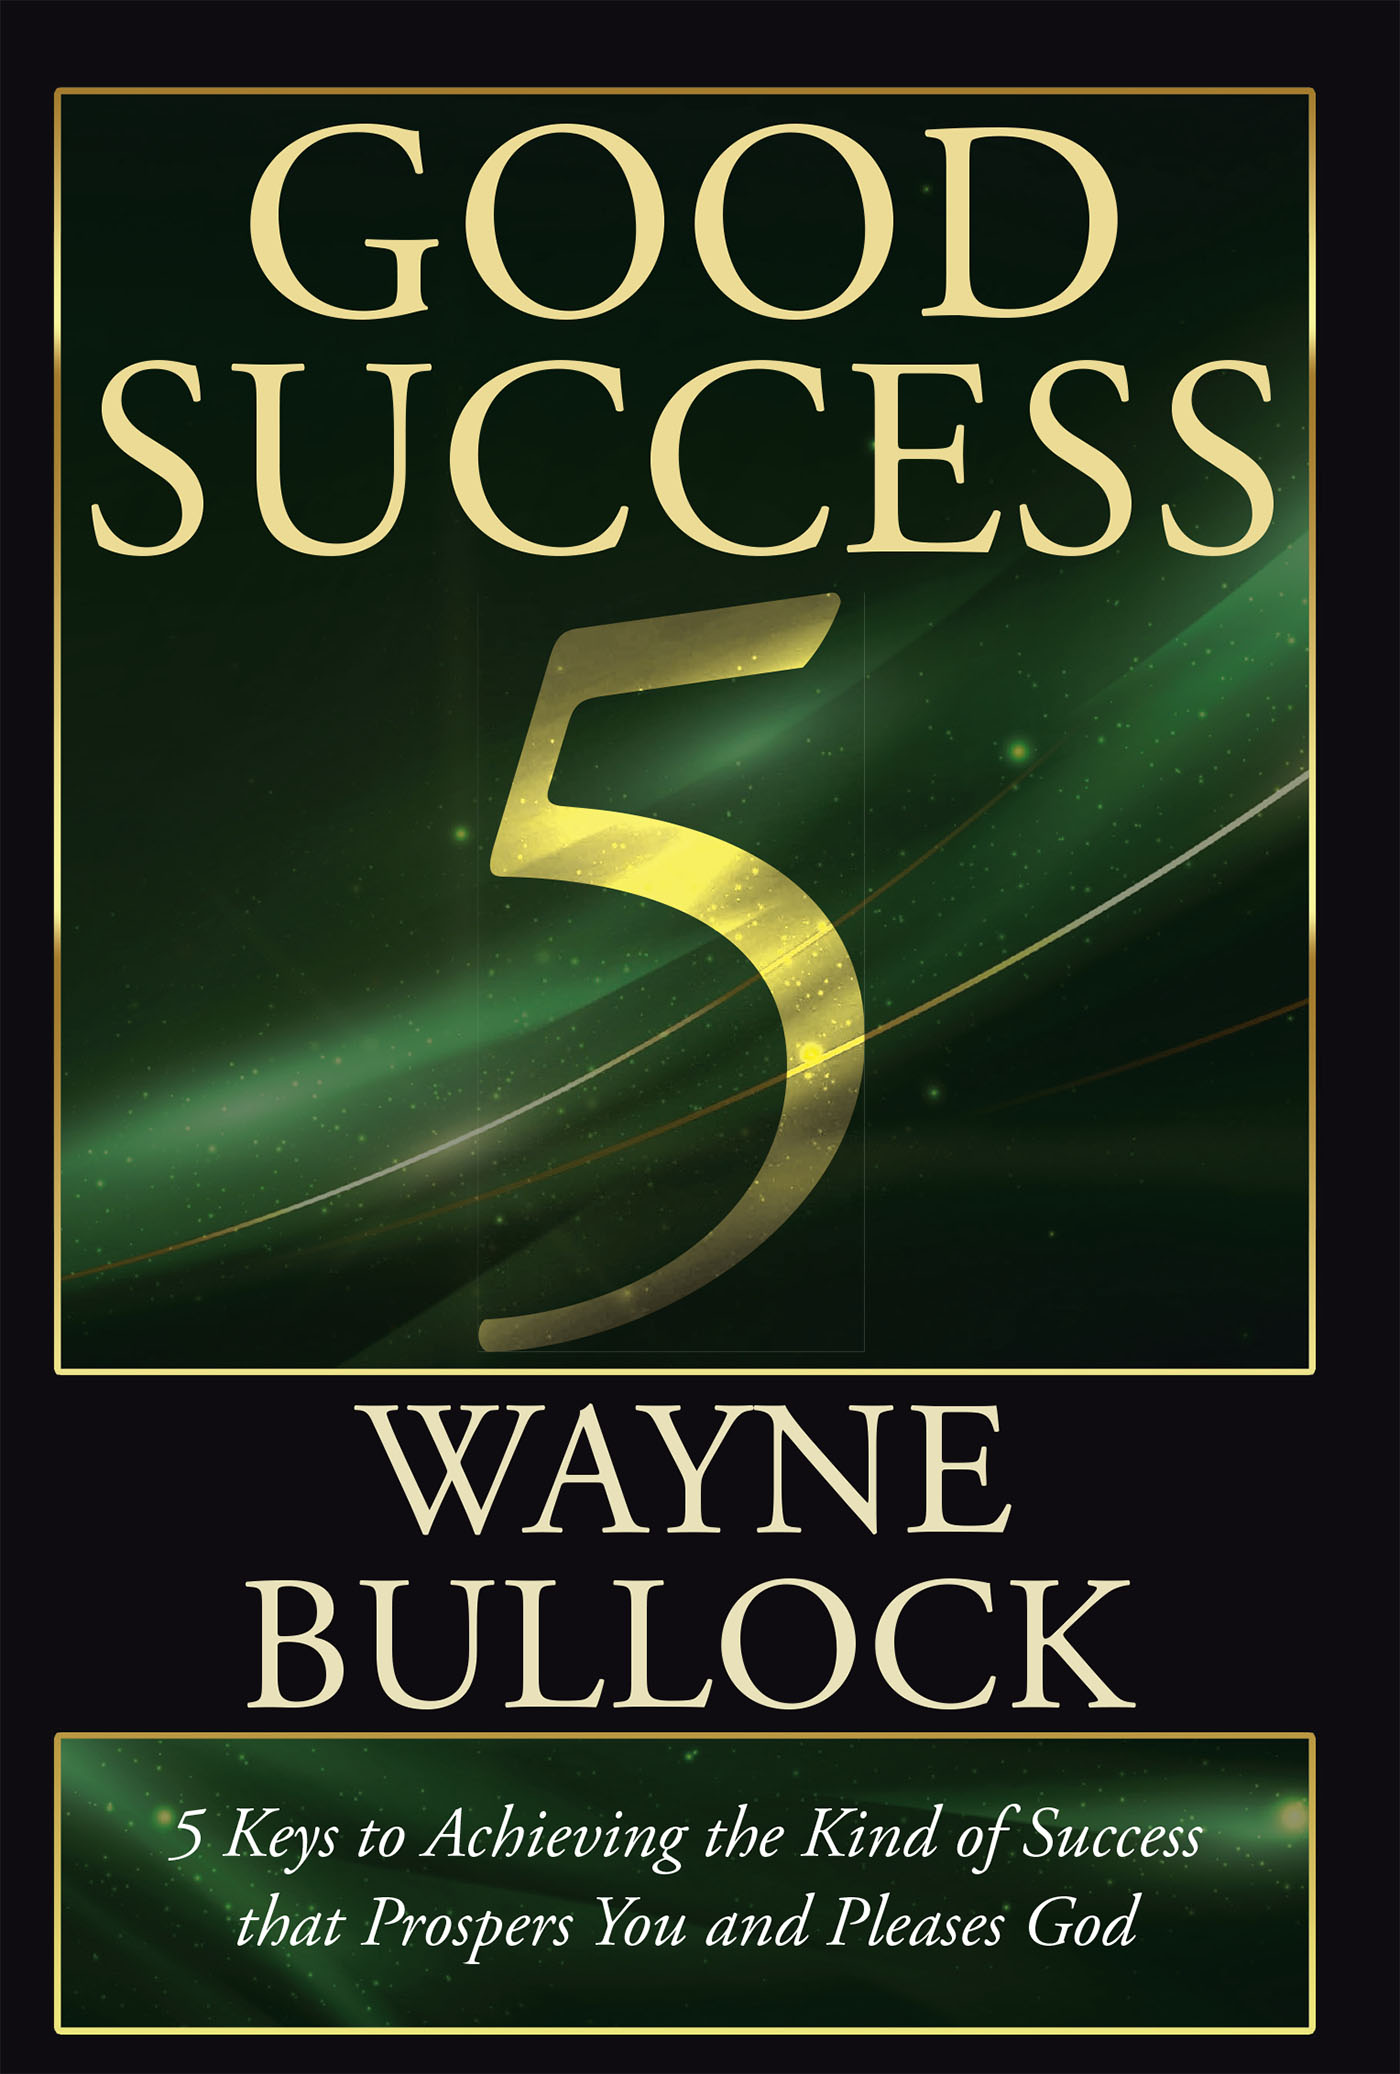 Wayne Bullock’s Newly Released “GOOD SUCCESS: 5 Keys to Achieving the Kind of Success that Prospers You and Pleases God” is an Inspiring Guide